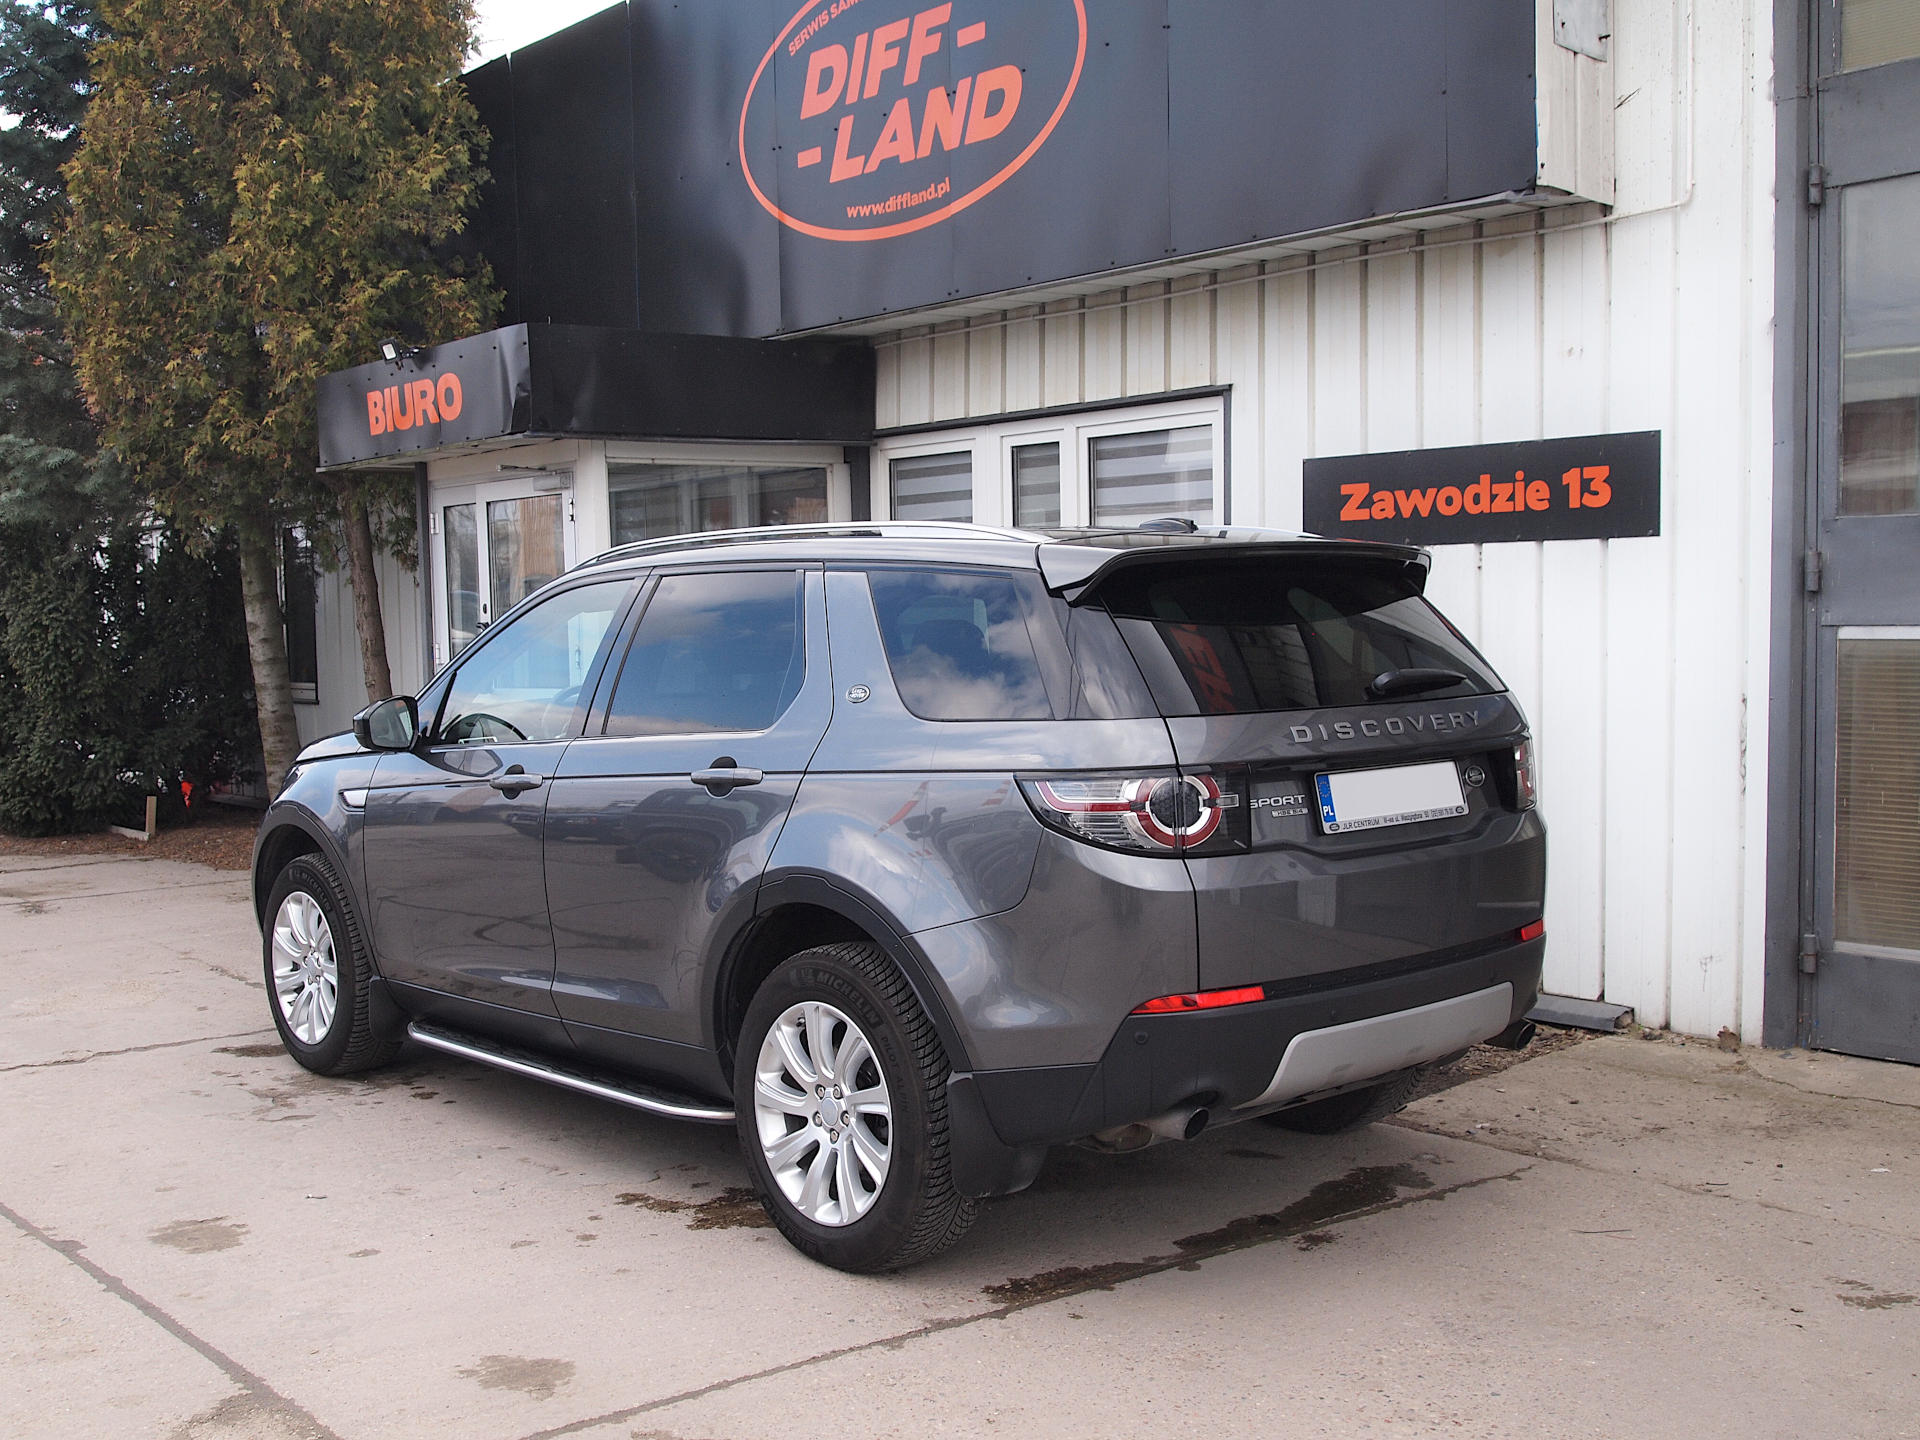 Land Rover Discovery Sport diffland.pl Serwis